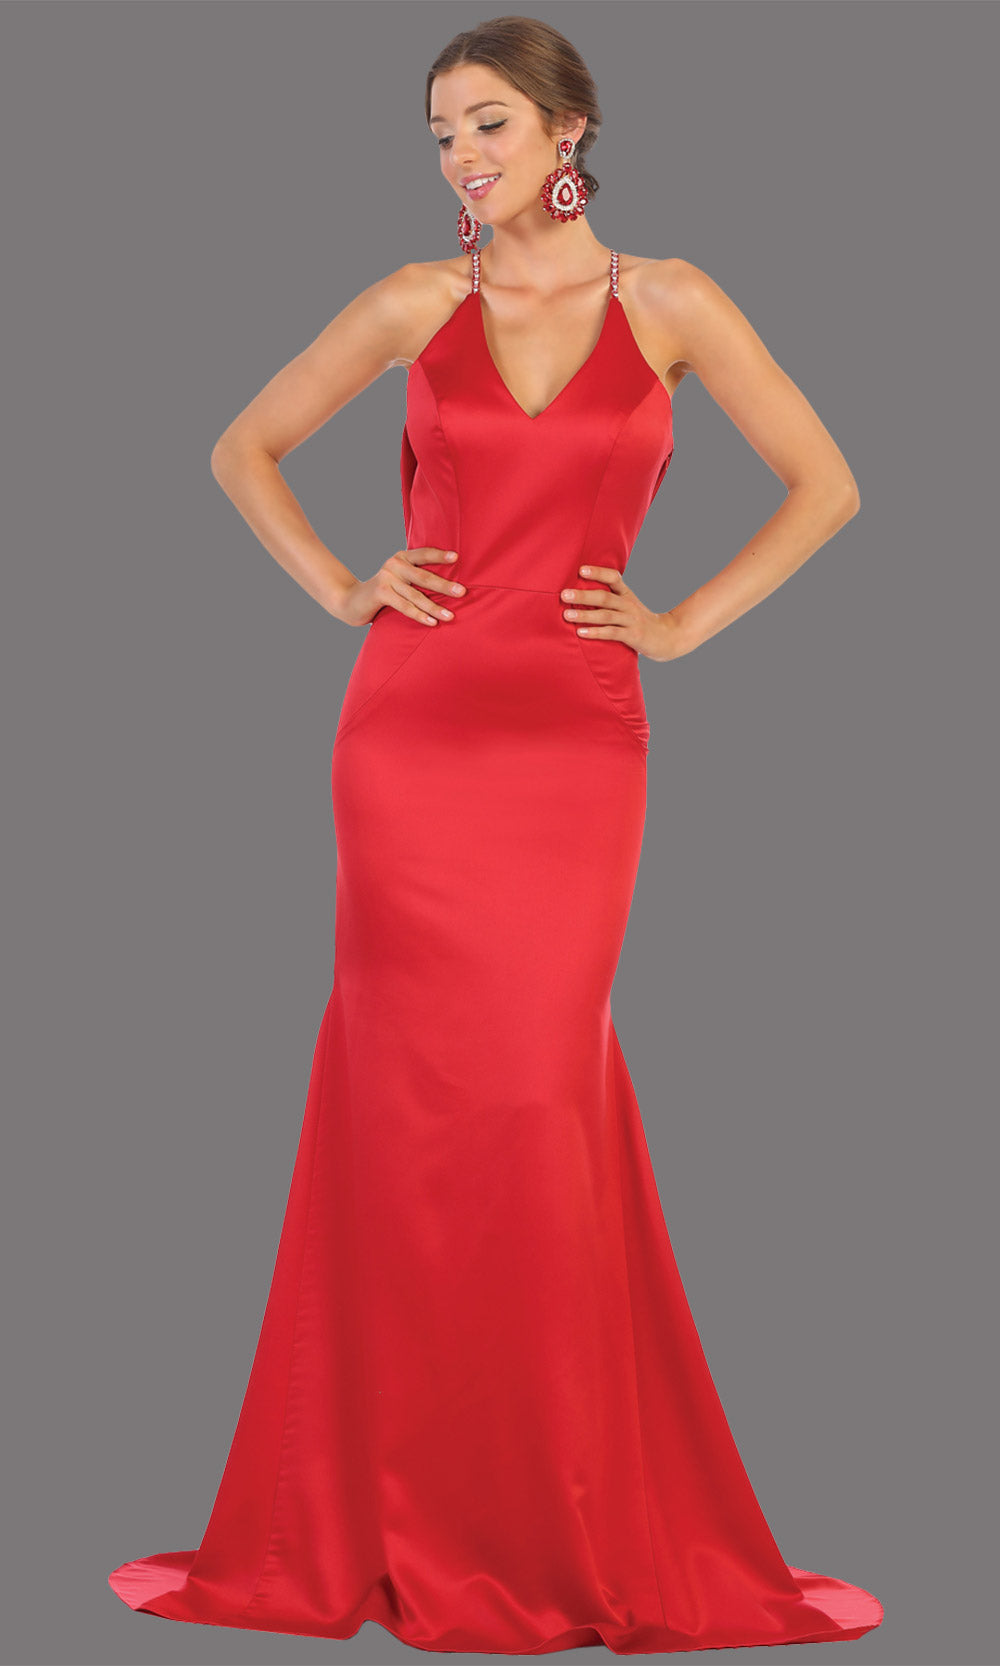 Mayqueen MQ1779 long red v neck fitted satin dress with open back & train. Perfect for prom, engagement dress, e-shoot dress, formal wedding guest dress, gala. Plus sizes avail in this red sleek & sexy dress.jpg